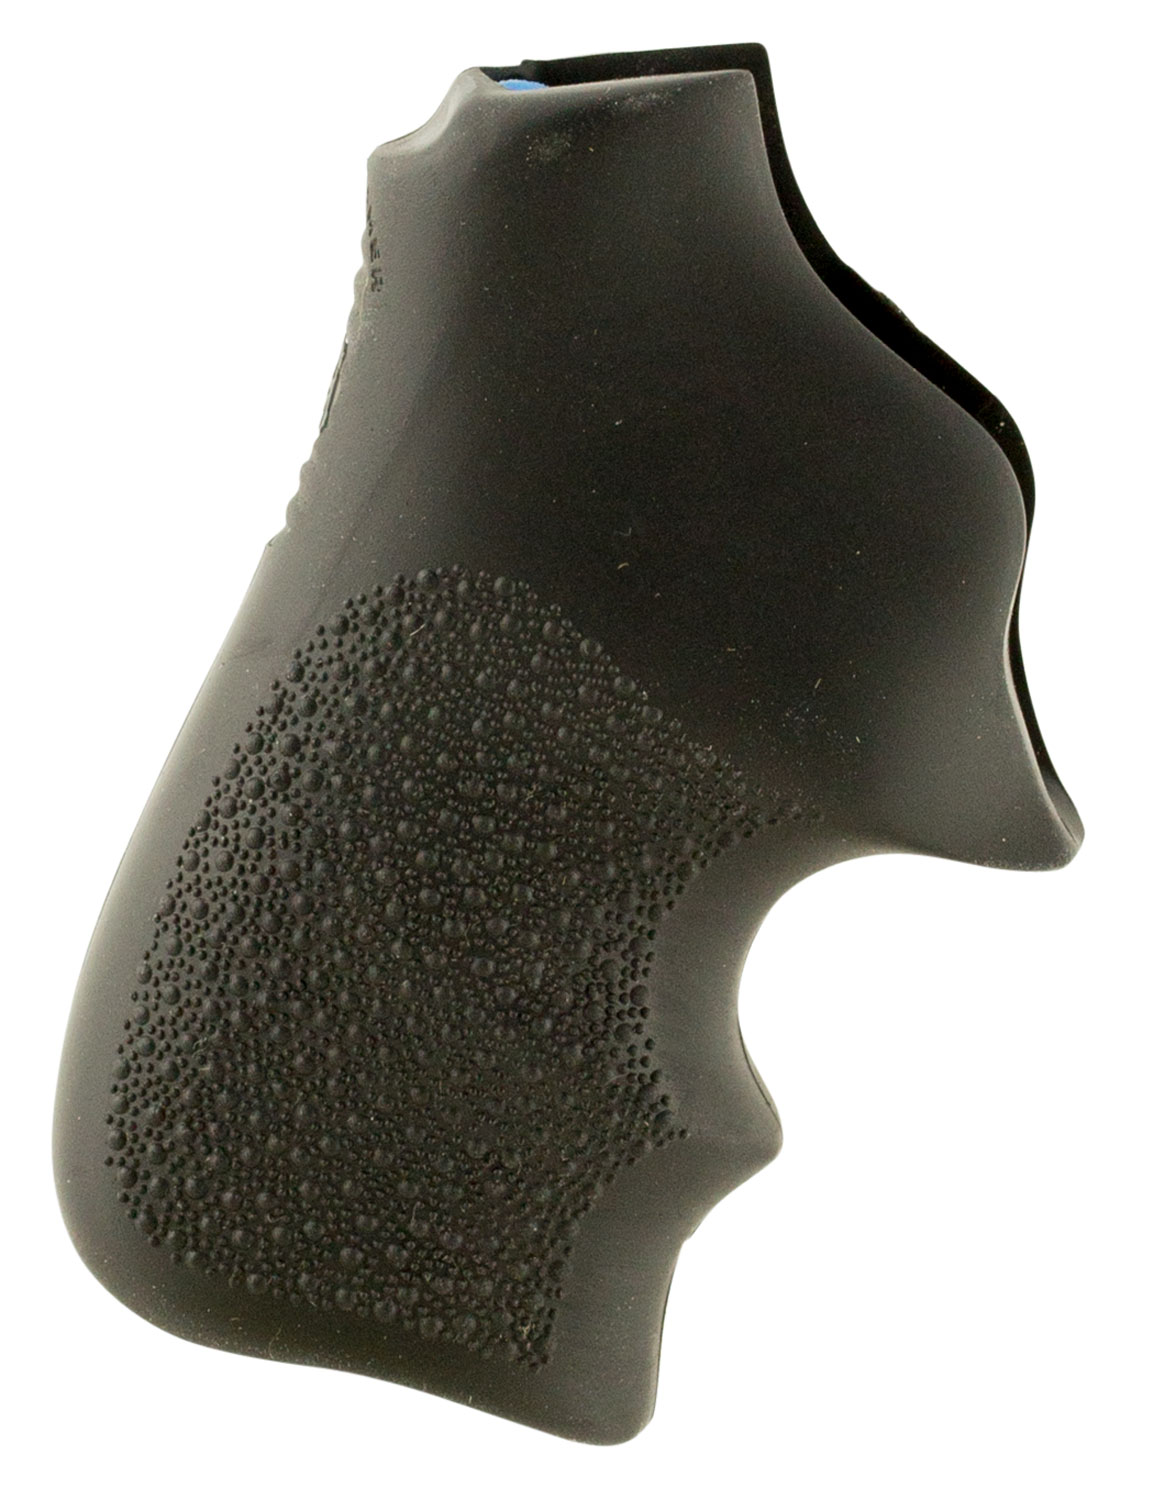 Hogue 78020 Tamer  Cushion Black Rubber Grip with Finger Grooves for Ruger LCR, LCRx